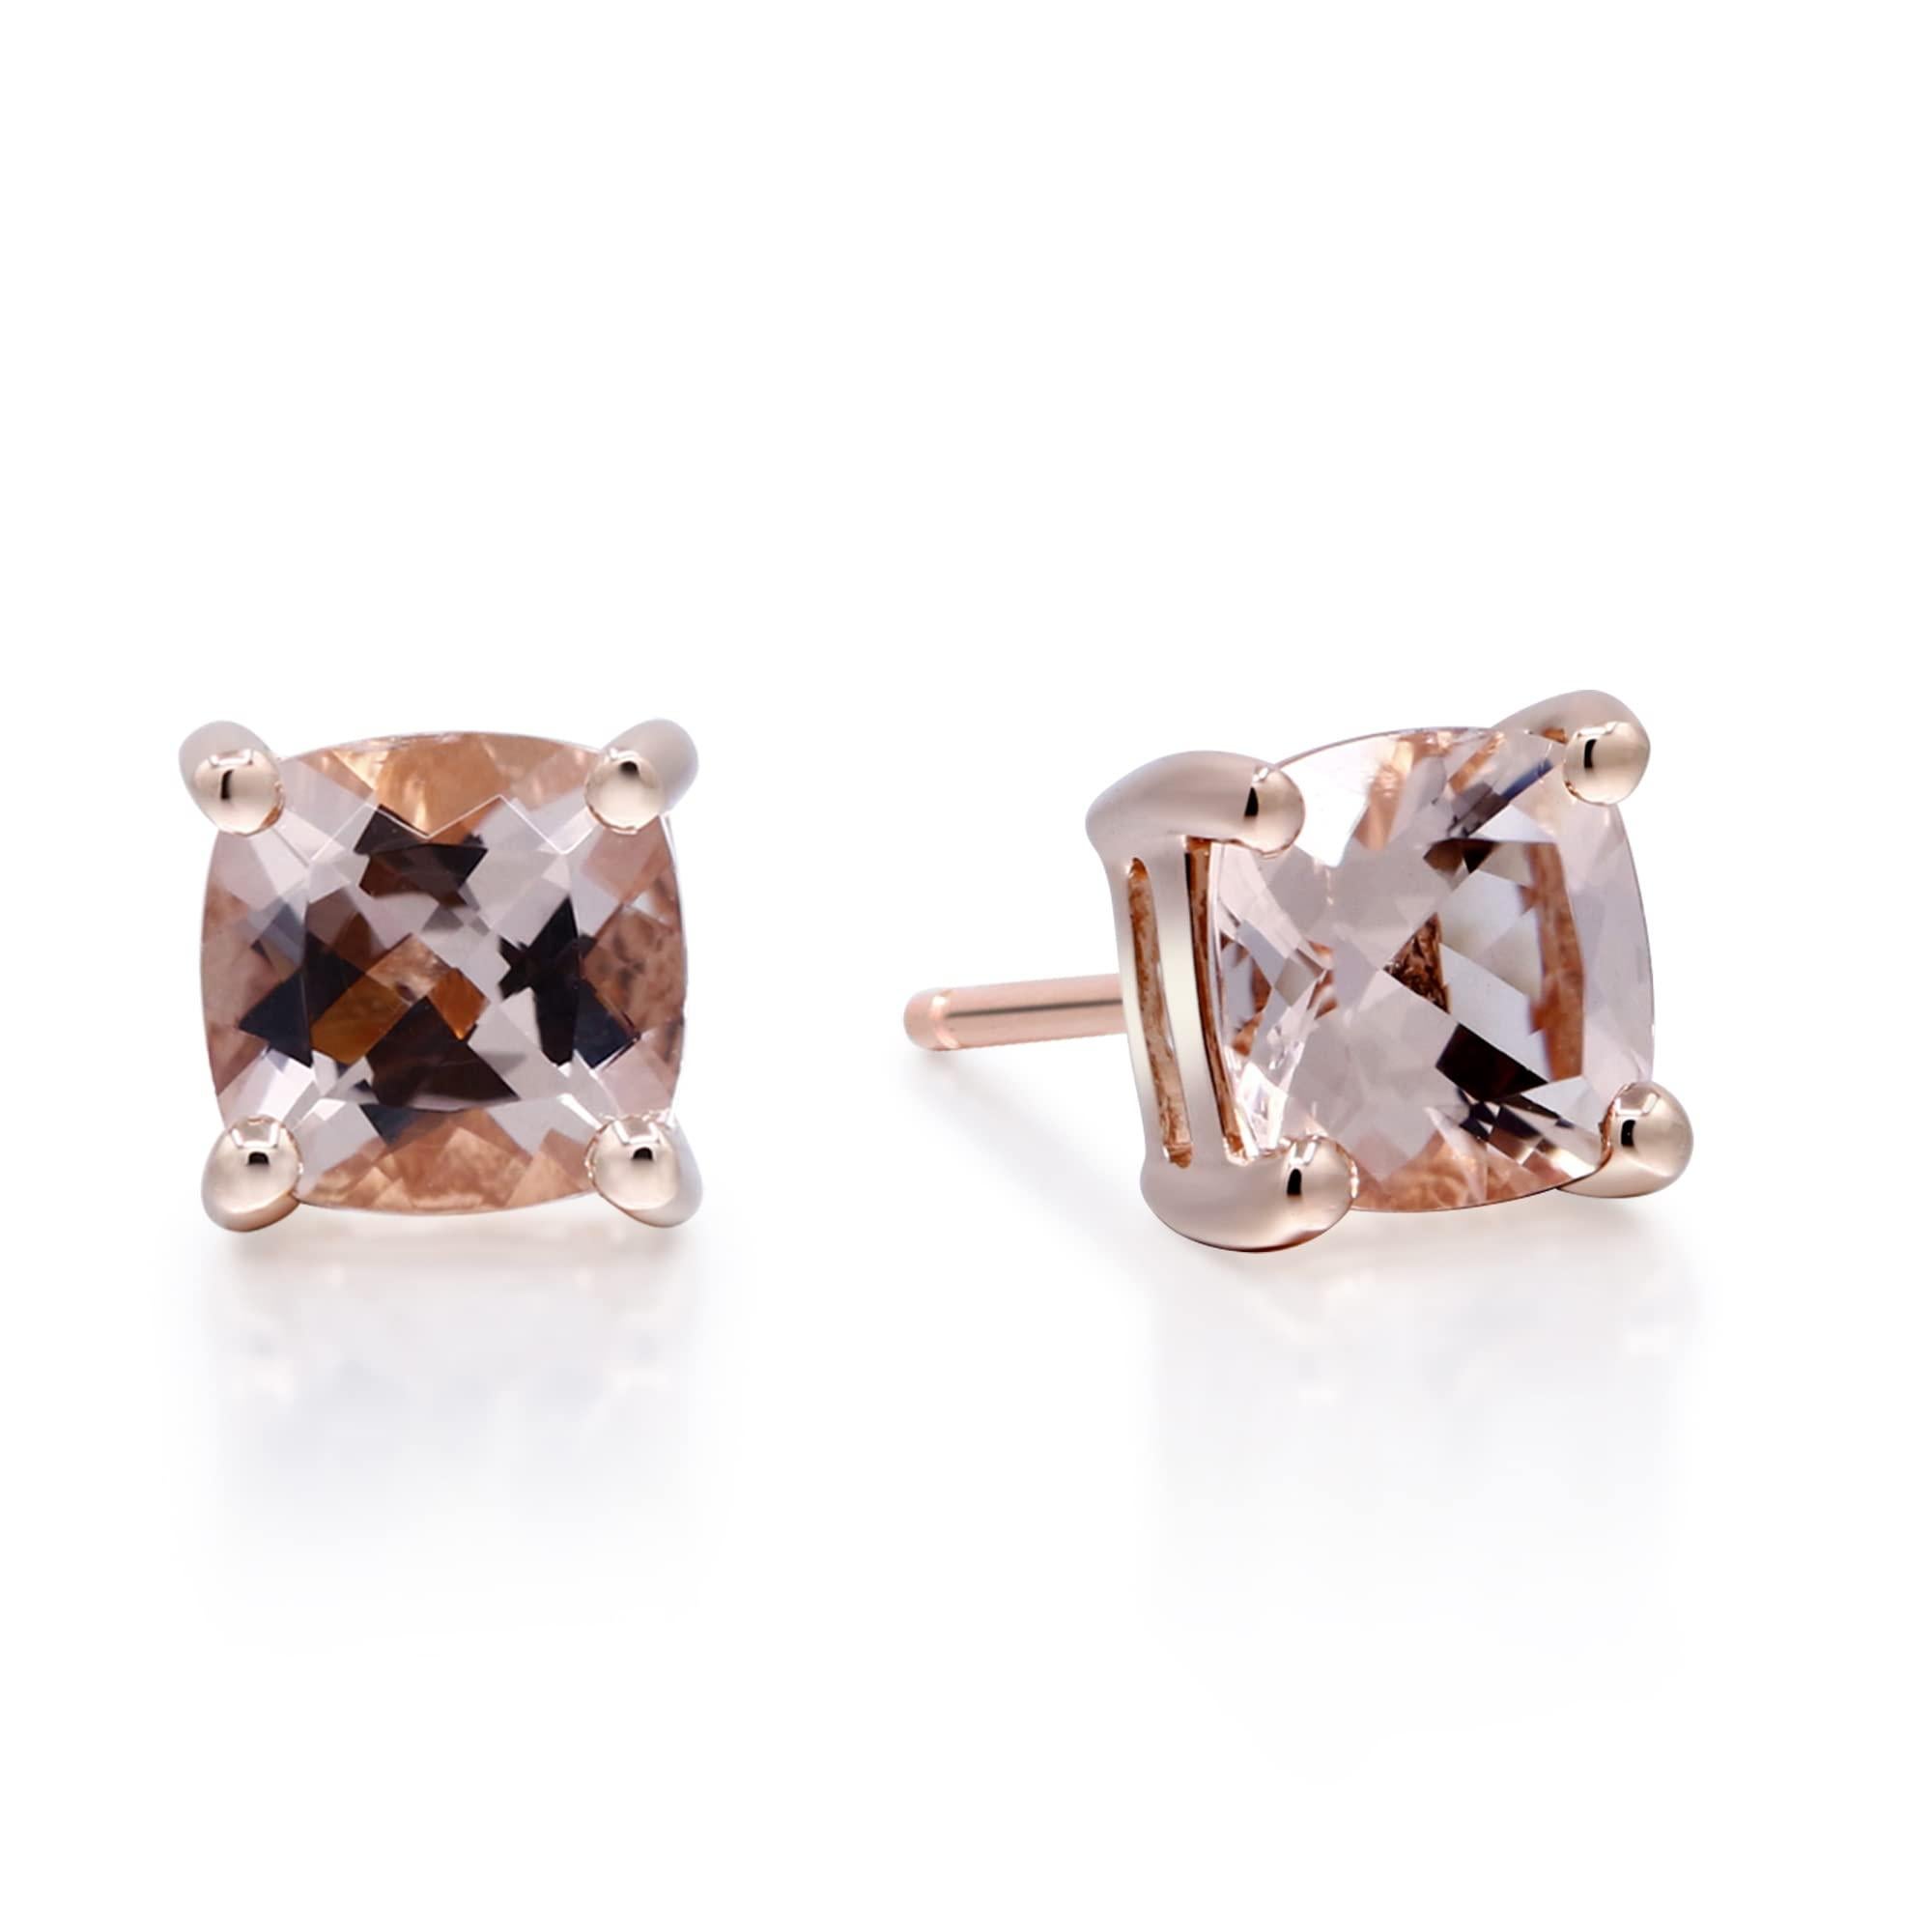 Decorate yourself in elegance with this Earring is crafted from 14-karat Rose Gold by Gin & Grace Earring. This Earring is made up of 6.0 mm Cushion-Cut Morganite (2 pcs) 1.63 carat. This Earring is weight 1.50 grams. This delicate Earring is